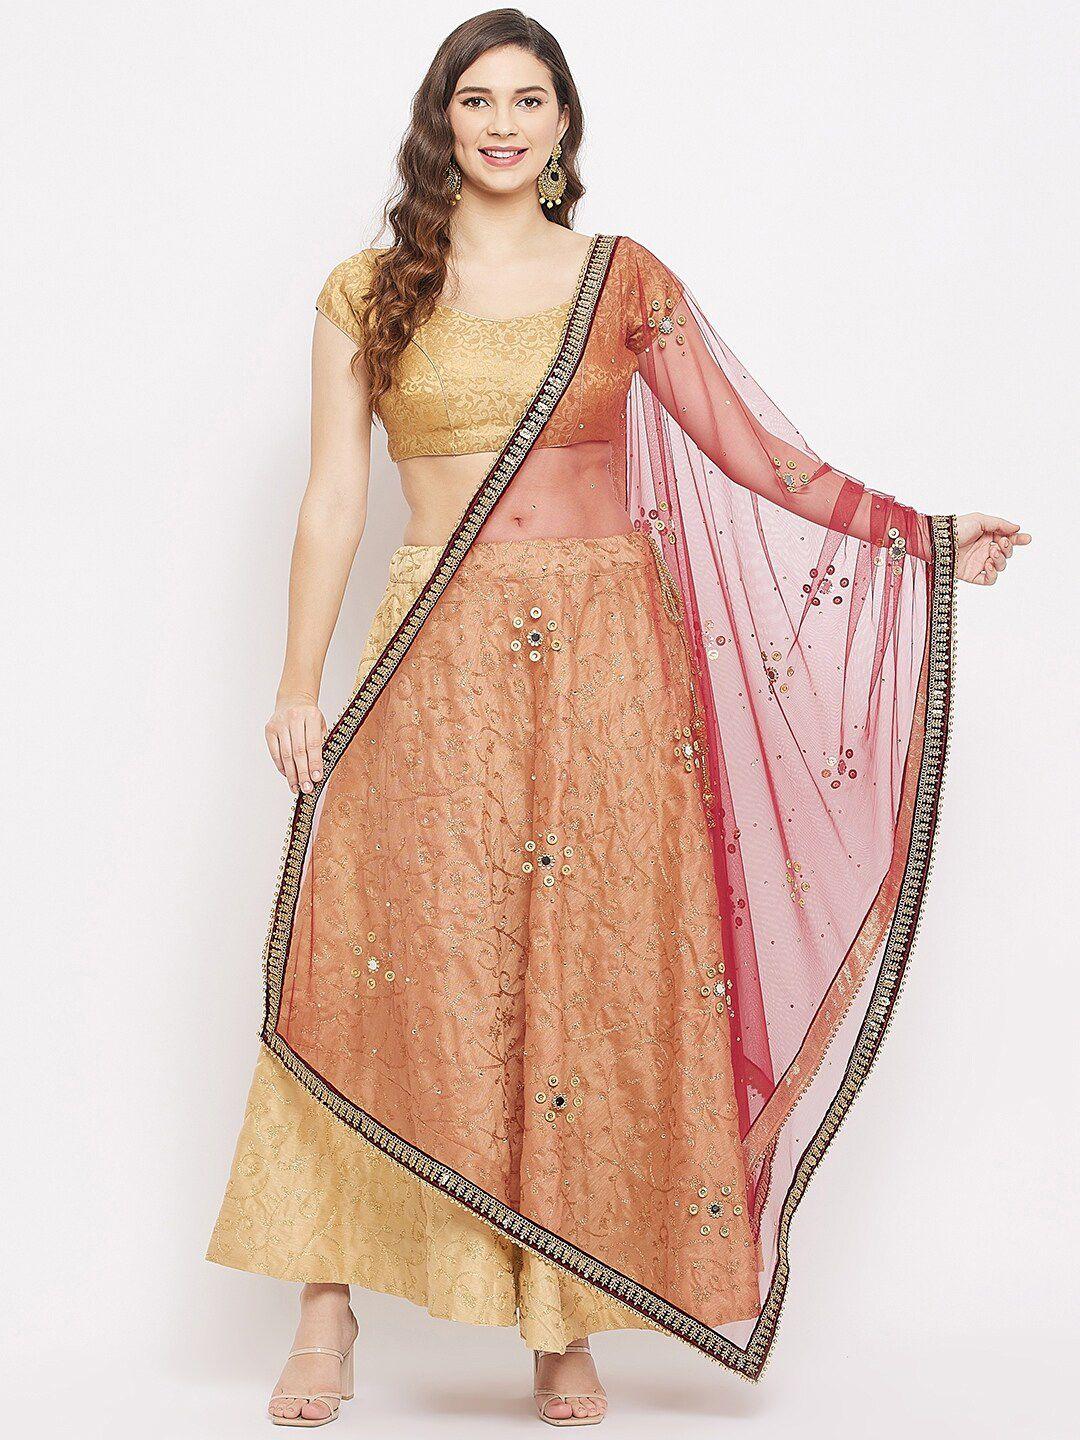 clora-creation-women-red-&-gold-toned-ethnic-motifs-embroidered-dupatta